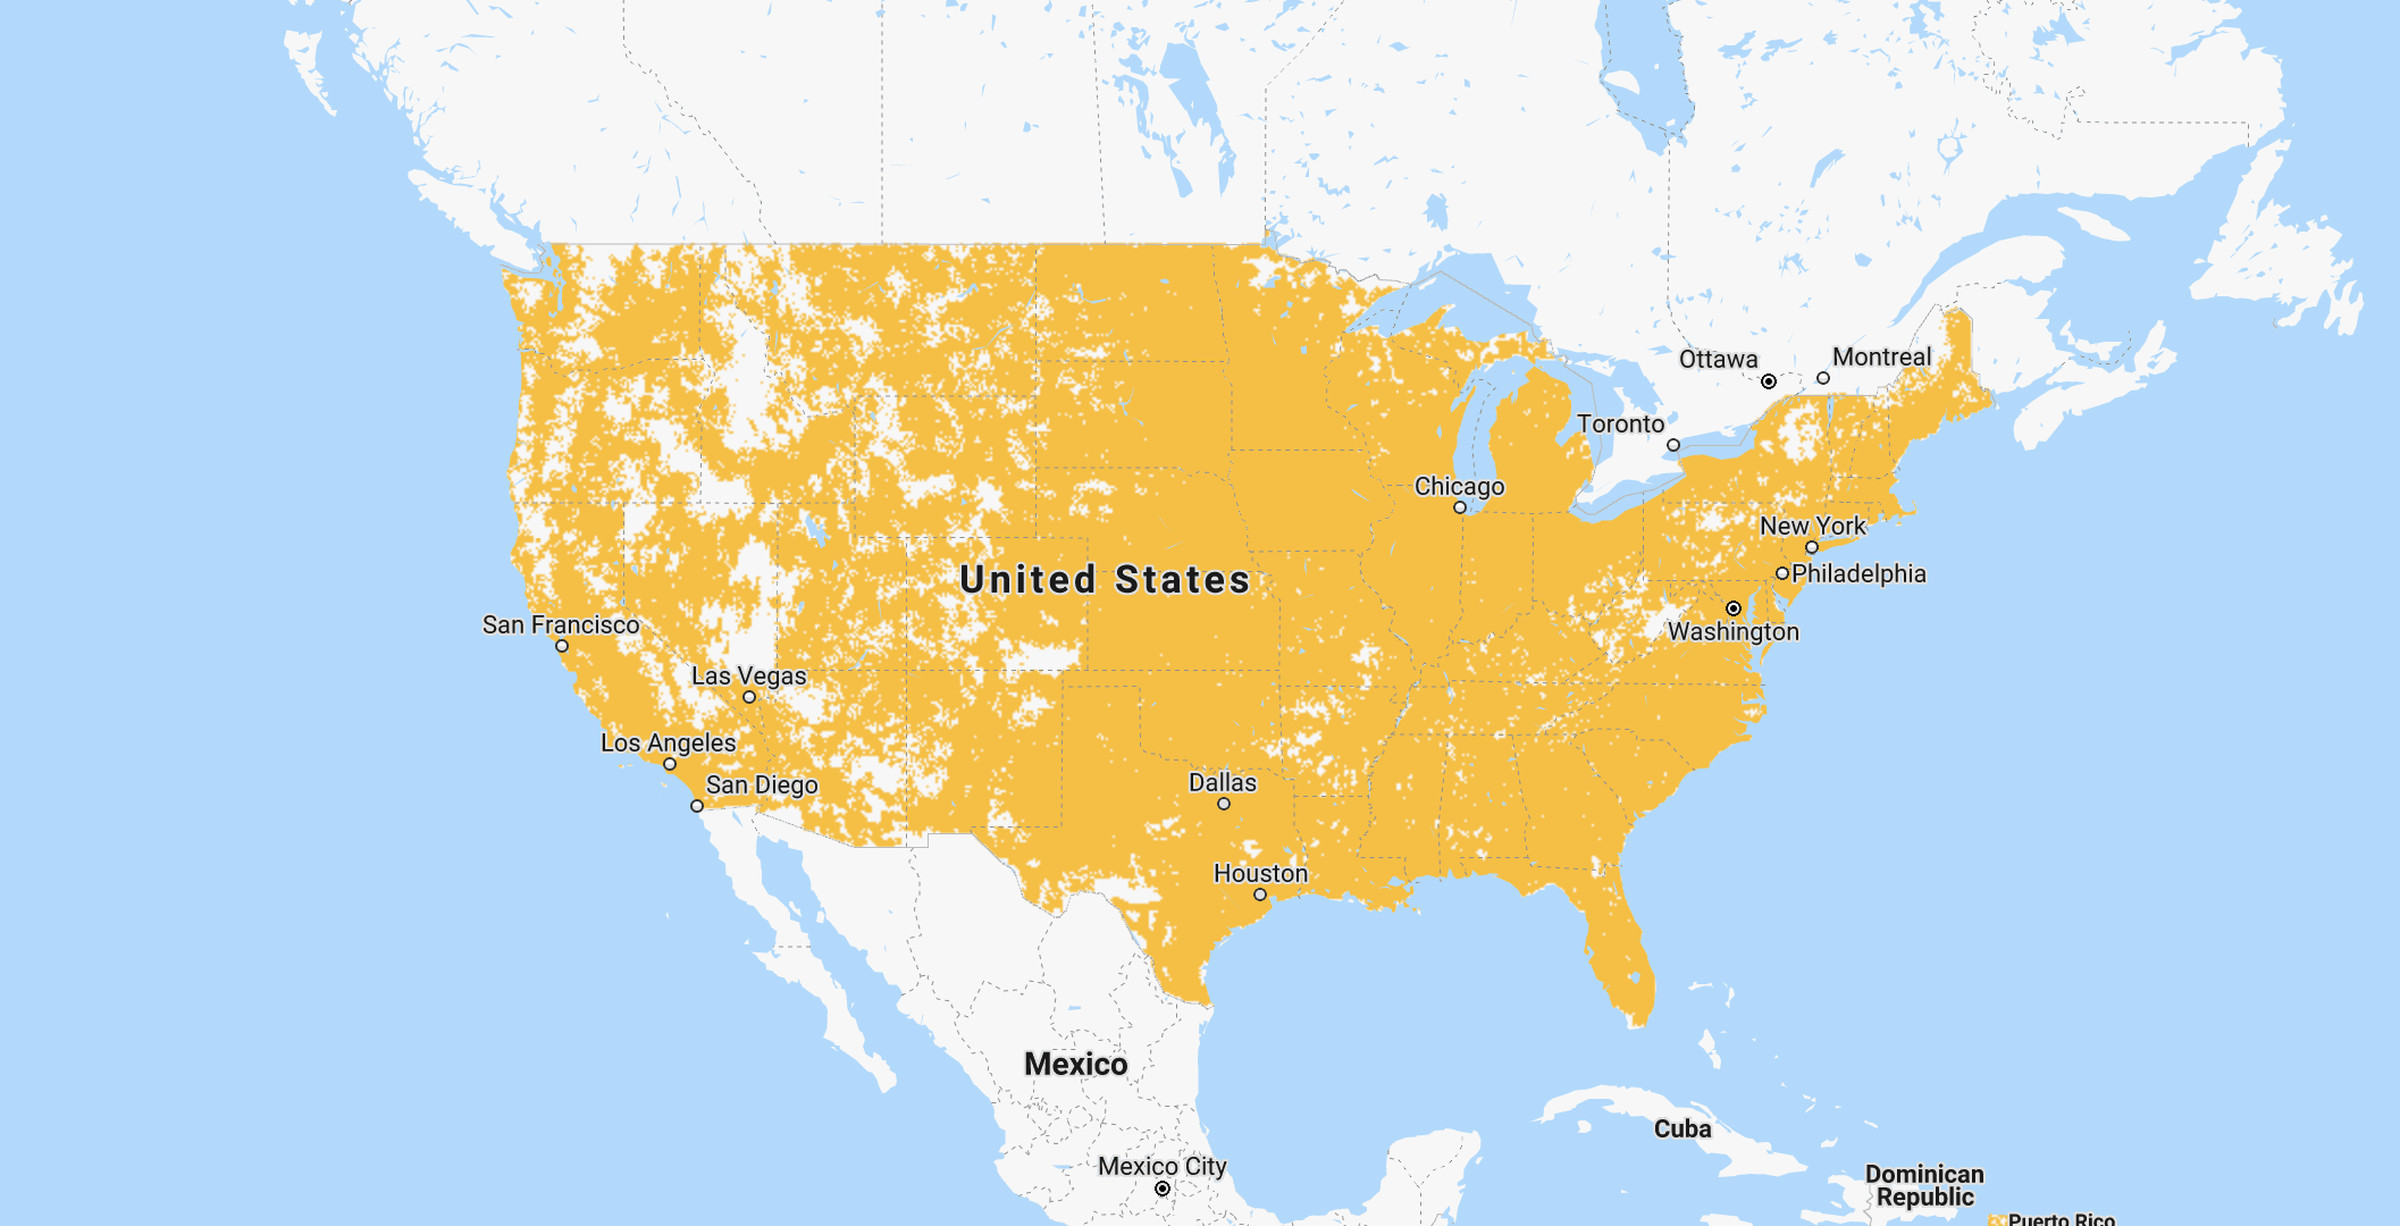 For comparison, Sprint’s usual coverage map